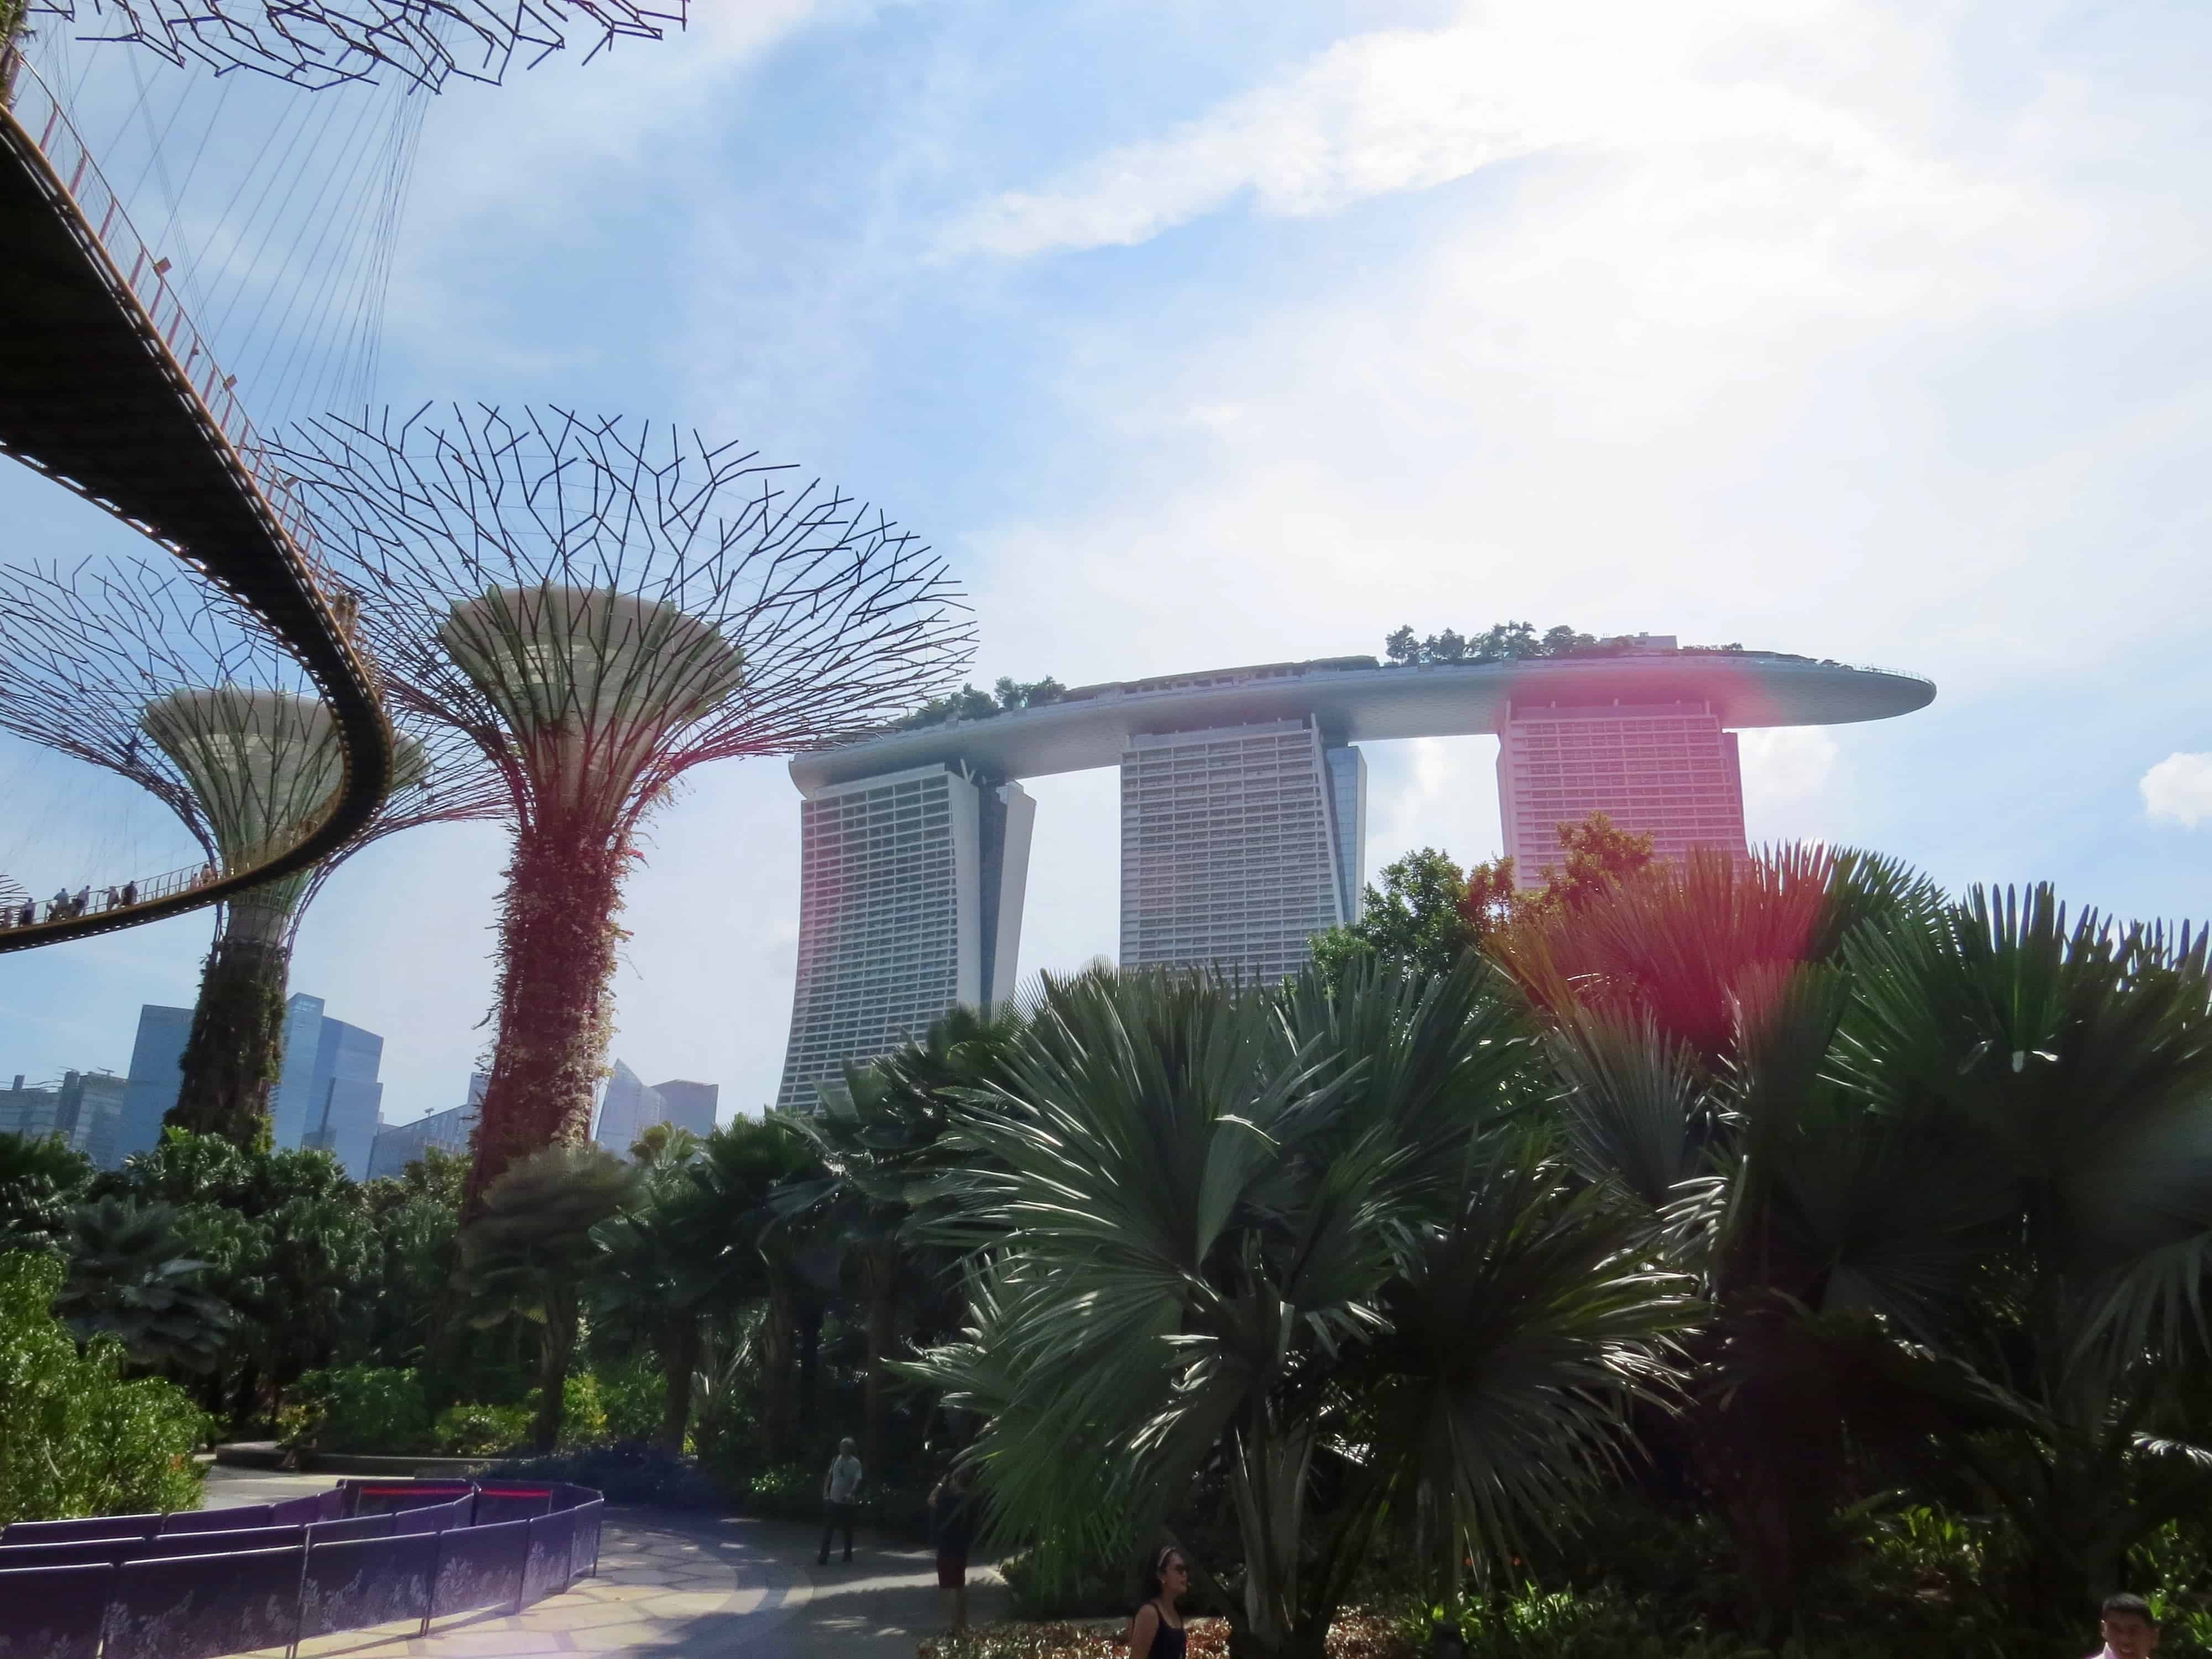 Marina Bay Sands hotel as seen from Gardens By The Bay in downtown Singapore